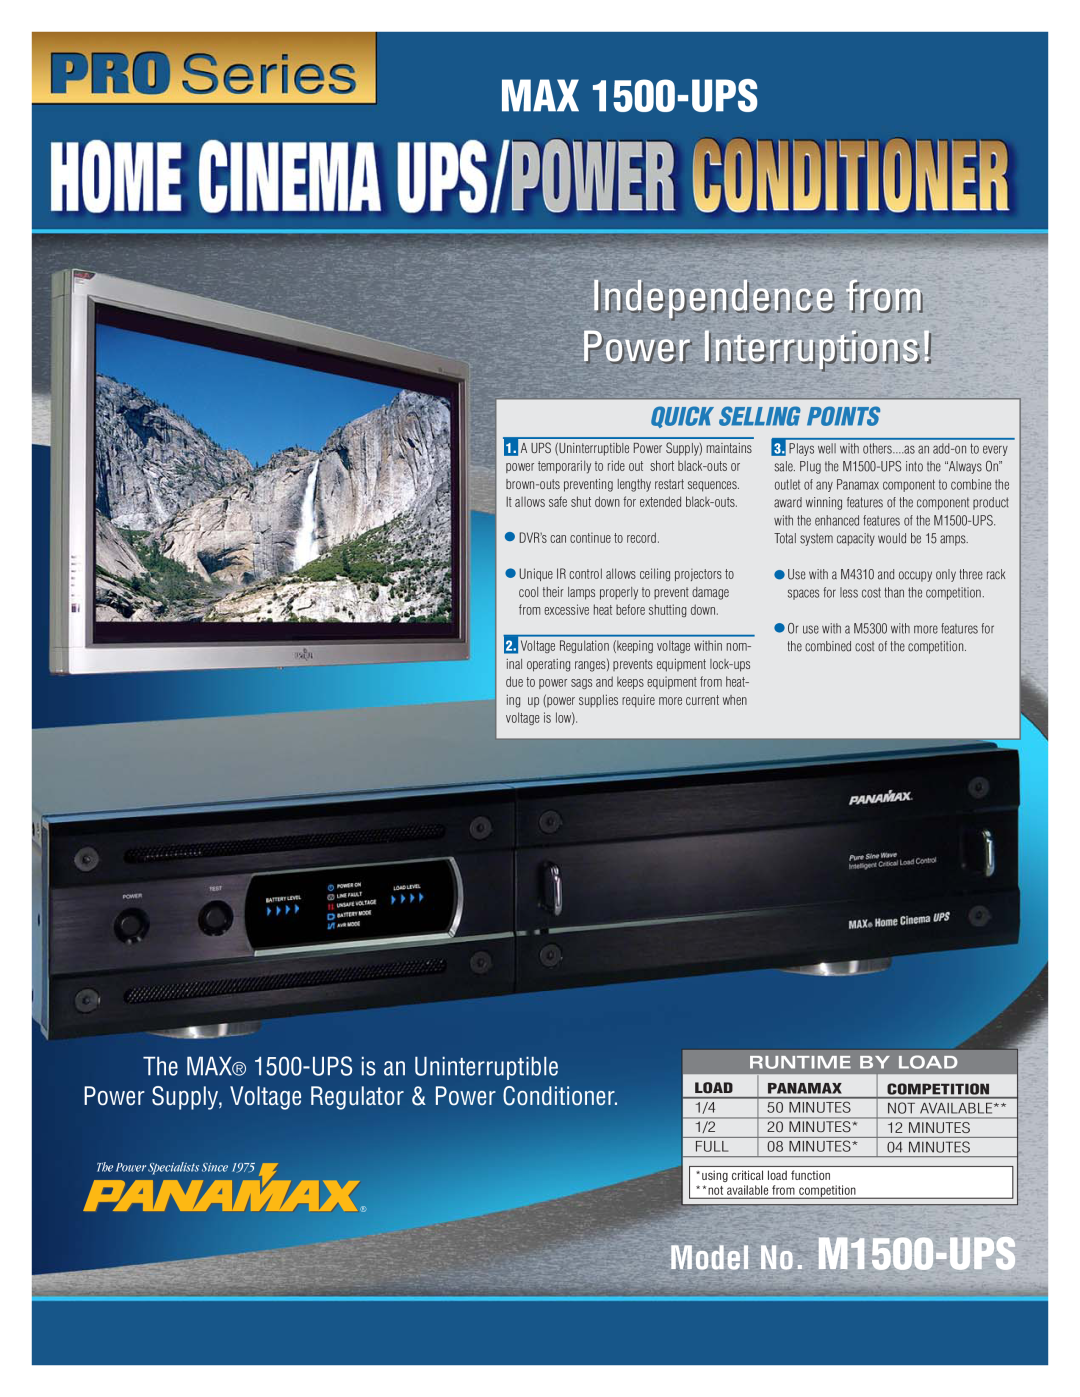 Panamax MAX 1500-UPS manual Independence from Power Interruptions, Model No. M1500-UPS, Quick Selling Points, Load, Full 